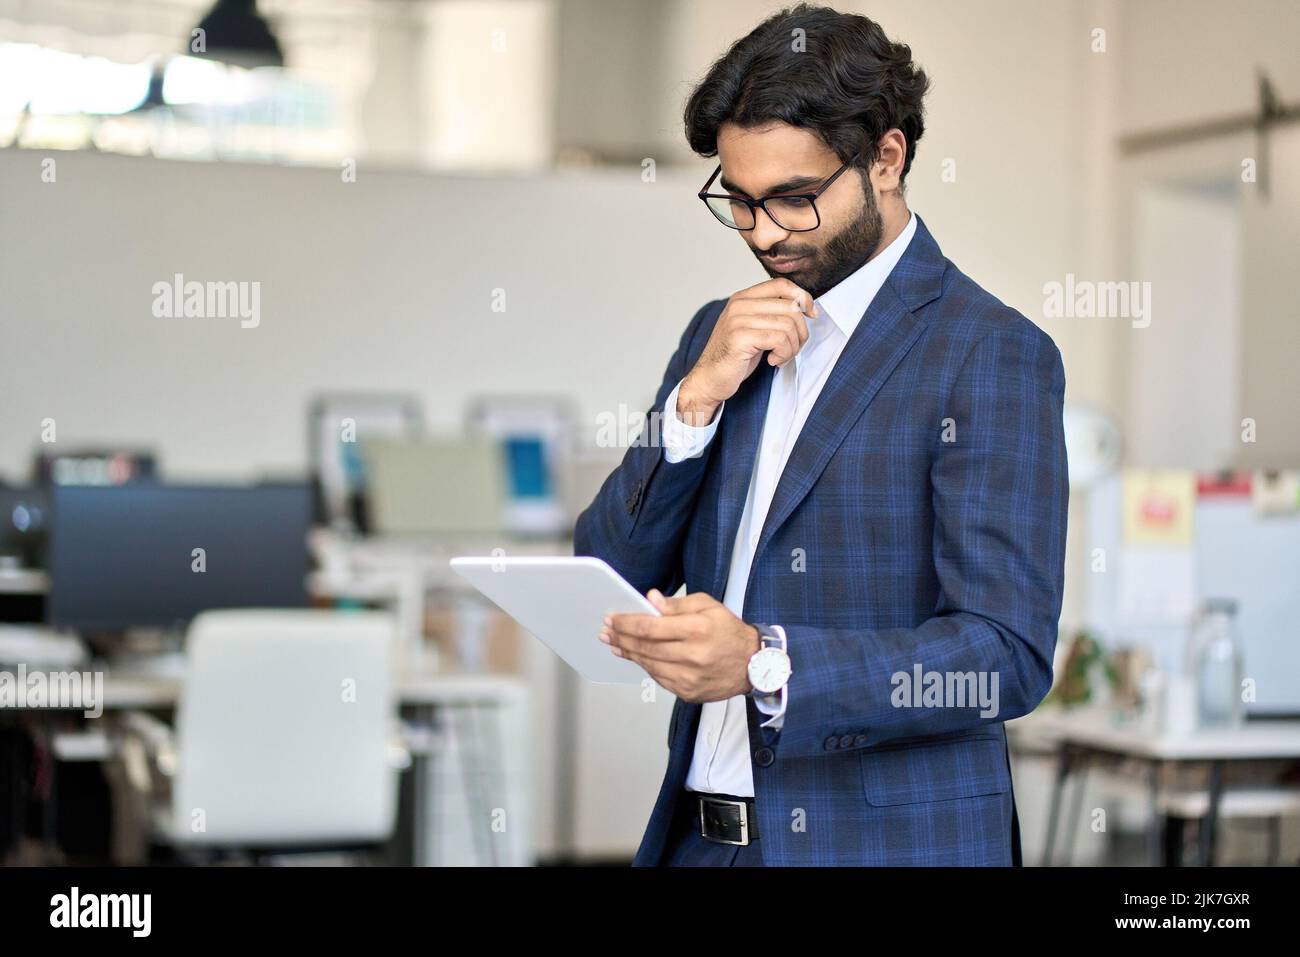 Busy indian young business man executive wearing suit using digital tablet. Stock Photo